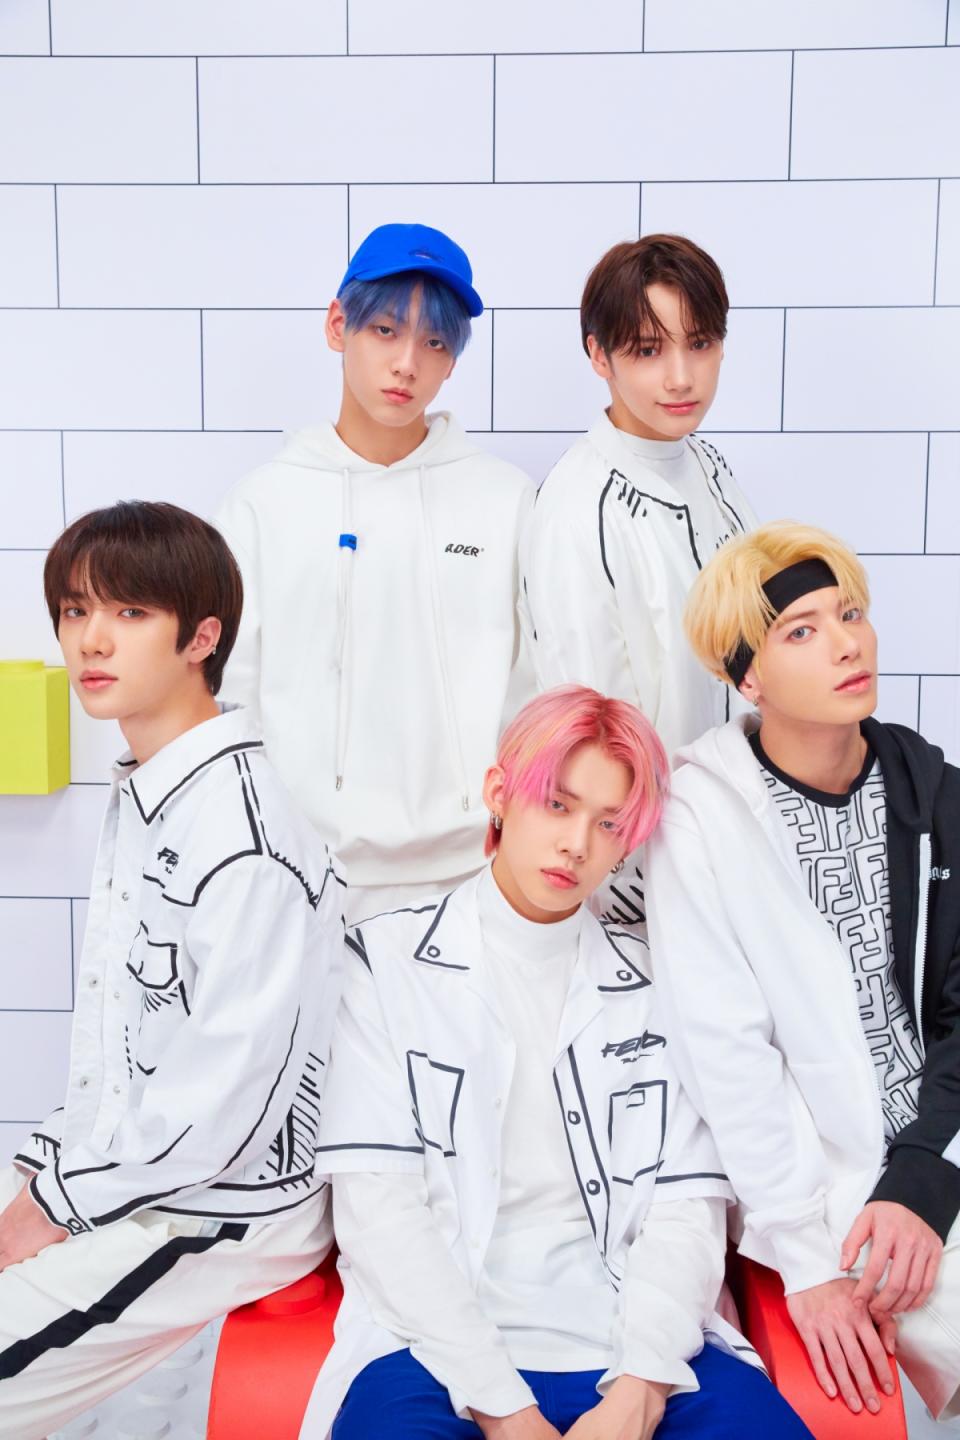 <p>We’re <i>Still Dreaming</i> about this next group!</p> <p>Tomorrow X Together, or TXT for short, is an upcoming K-pop group made up of five members: Yeonjun, Soobin, Beomgyu, Taehyun and Huening Kai. Their latest EP <i>minisode1: Blue Hour</i> released on debuted at number 25 on the <i>Billboard </i>200 and number one on <i>Billboard’s</i> World Album chart.</p> <p>“Music carries messages we can all relate to and connect with,” TXT tells PEOPLE. “We hope, through our music, we can share our dreams and build a brighter tomorrow together with people all over the world.”</p> <p>With hit songs like <a href="https://www.youtube.com/watch?v=cMFHUTJ13Ys" rel="nofollow noopener" target="_blank" data-ylk="slk:“Can’t You See Me?”;elm:context_link;itc:0;sec:content-canvas" class="link ">“Can’t You See Me?”</a> and <a href="https://www.youtube.com/watch?v=W3iSnJ663II" rel="nofollow noopener" target="_blank" data-ylk="slk:“CROWN,”;elm:context_link;itc:0;sec:content-canvas" class="link ">“CROWN,”</a> they have been the first K-pop group to be featured on the cover of <i>Teen Vogue</i> and is the first Korean band to have their debut album, <em>The Dream Chapter: STAR</em><em>, </em>chart on the <i>Billboard </i>200.</p> <p>Listen to their song <a href="https://www.youtube.com/watch?v=EE63e2RJlpc" rel="nofollow noopener" target="_blank" data-ylk="slk:“Everlasting Shine”;elm:context_link;itc:0;sec:content-canvas" class="link ">“Everlasting Shine” </a>from their 2021 album <i>Still Dreaming.</i></p>